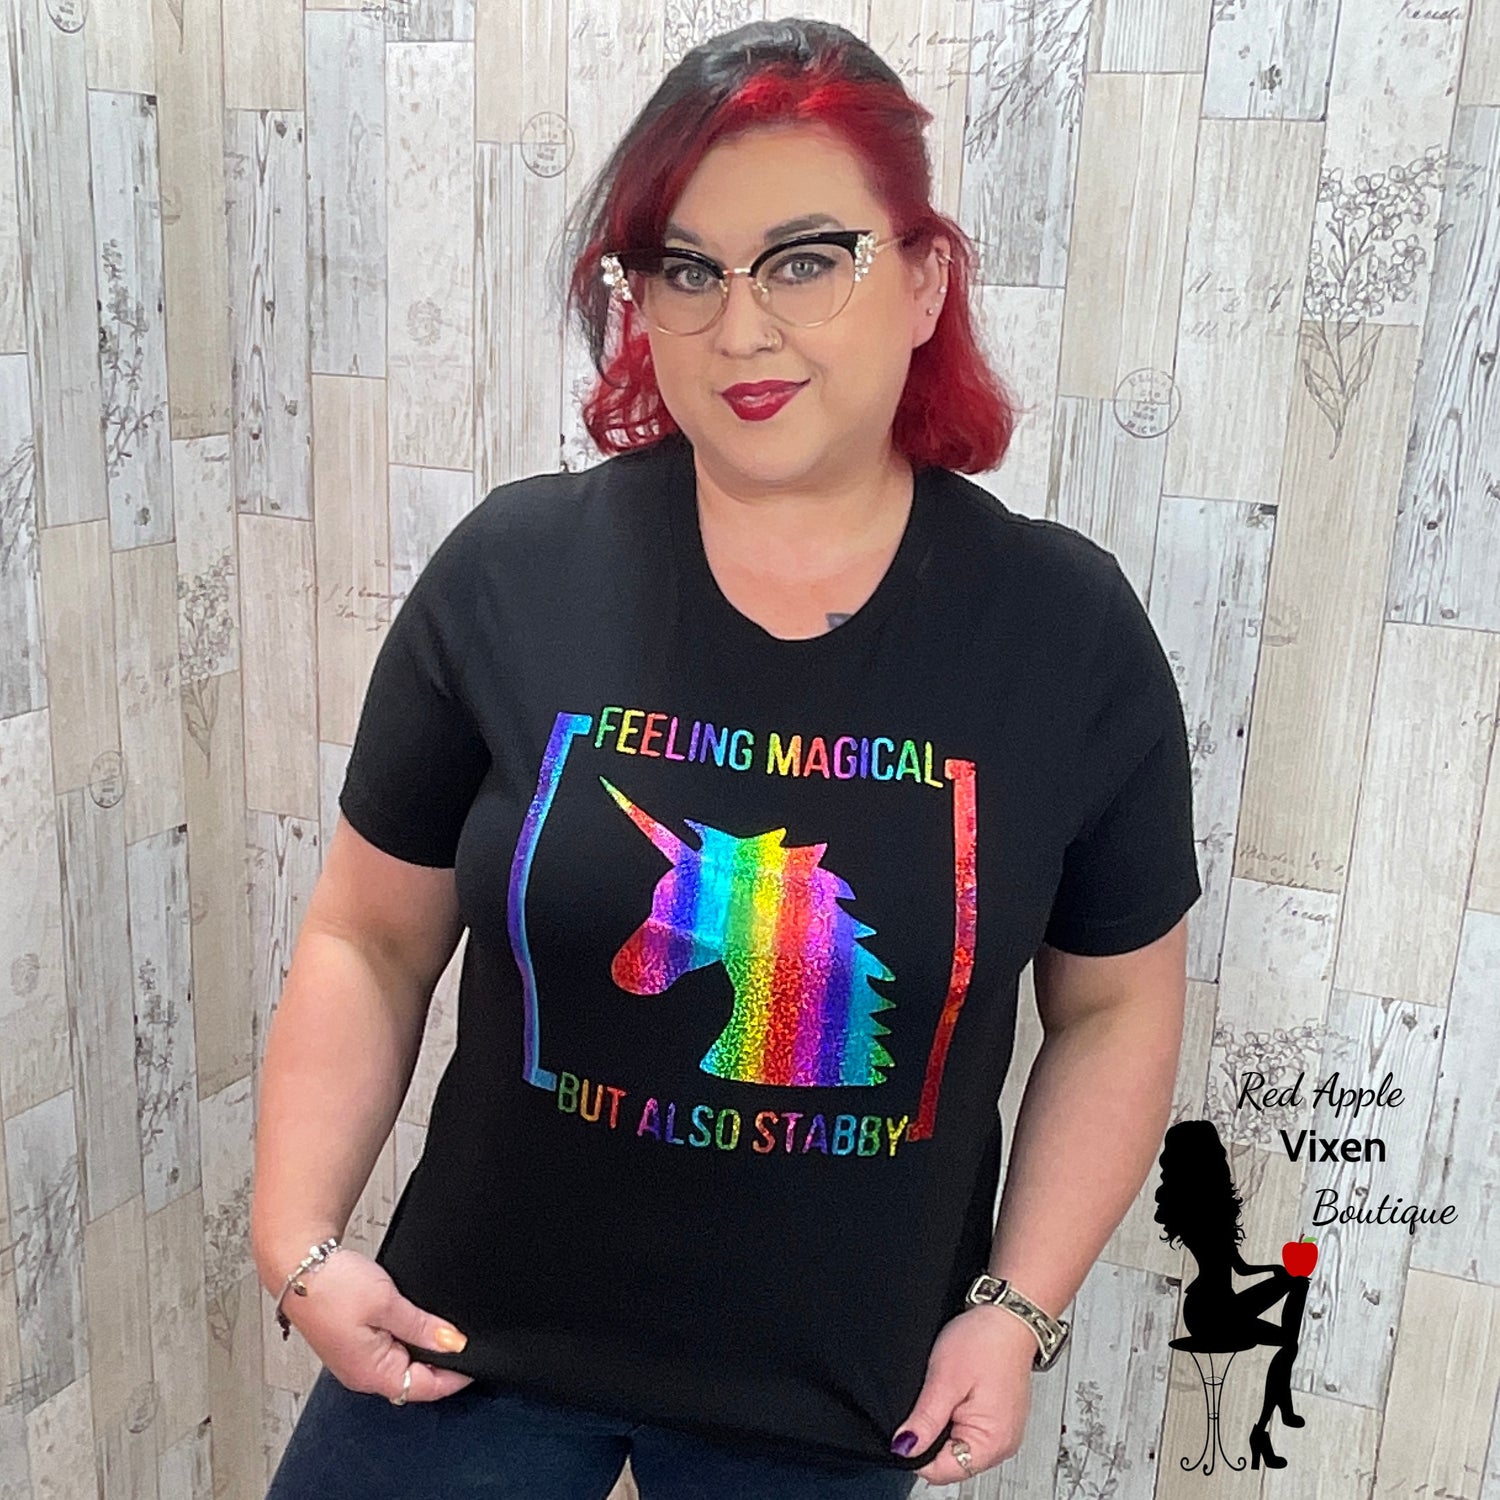 Feeling Magical but also Stabby Graphic Tee - Sassy Chick Clothing